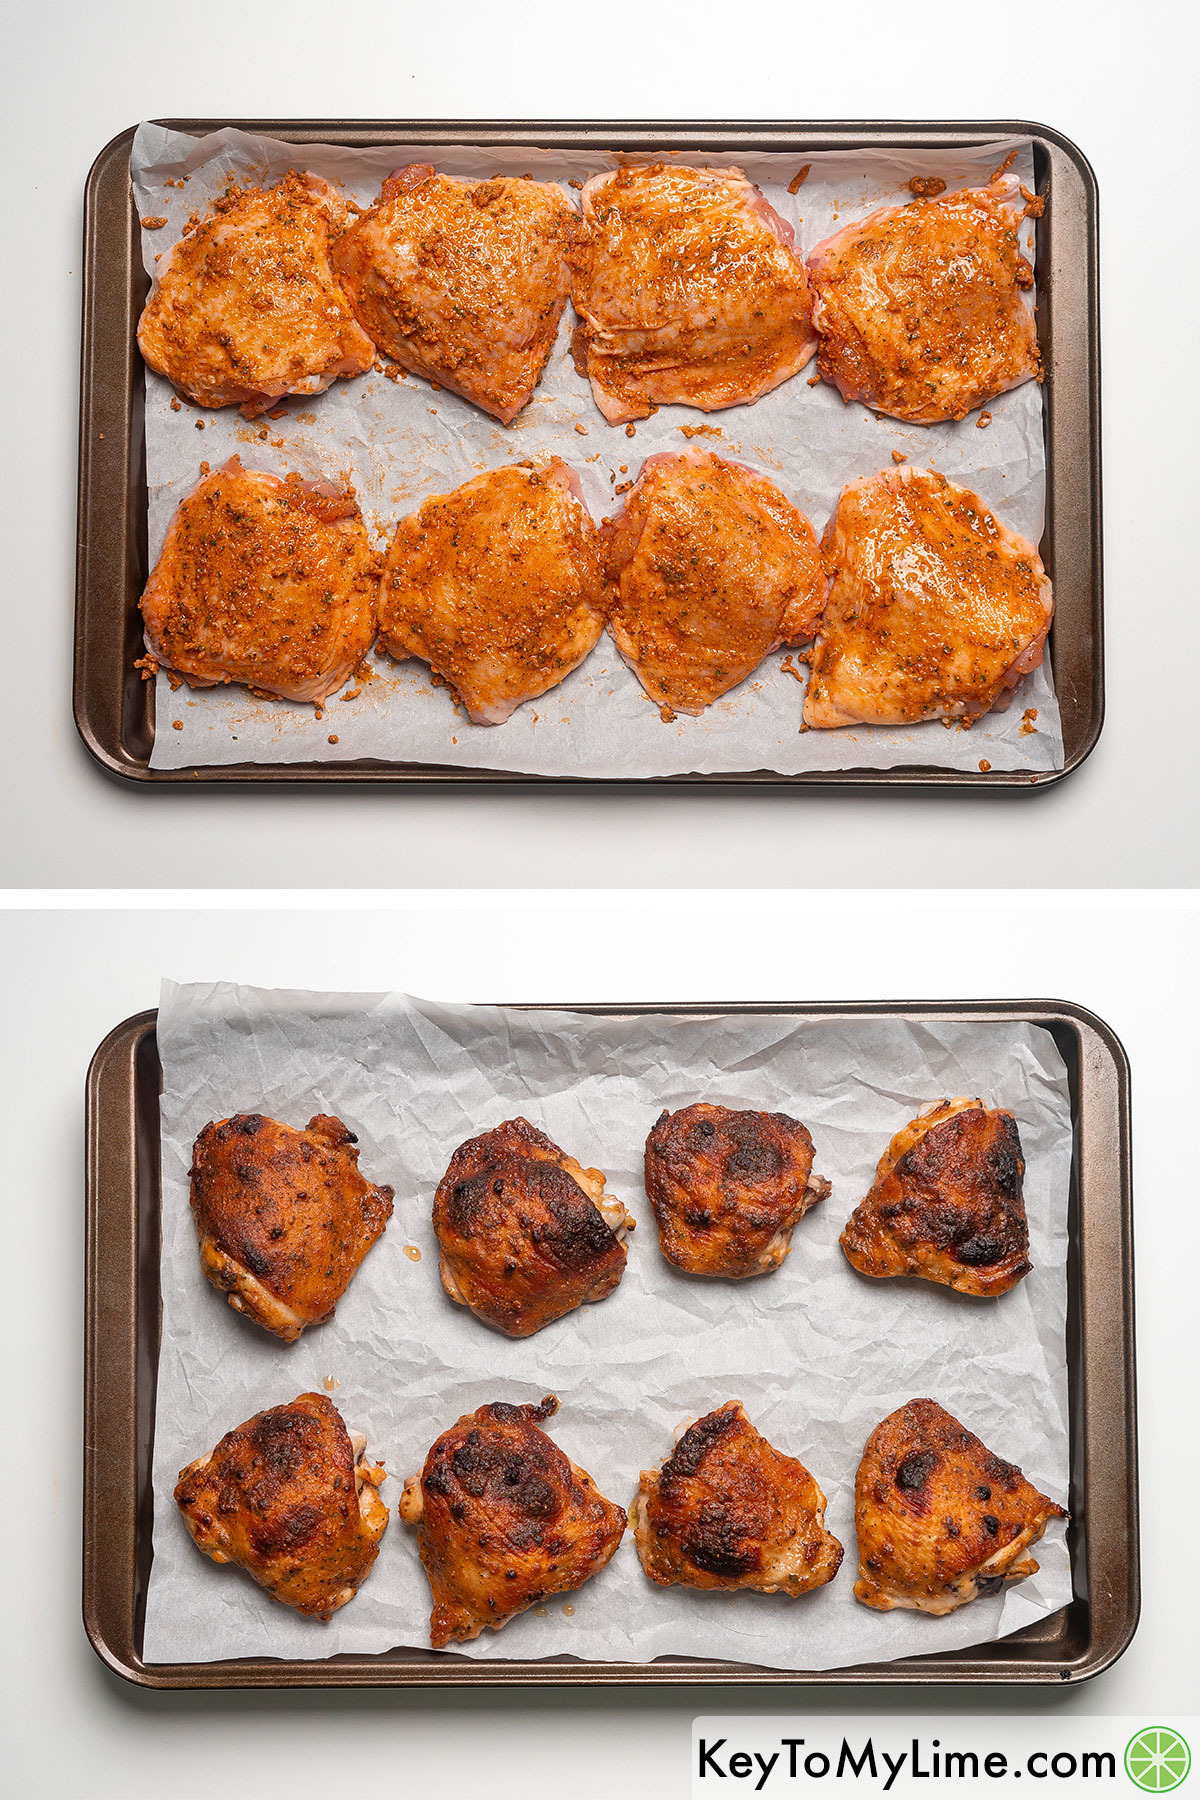 Before and after cooking the chicken thighs.